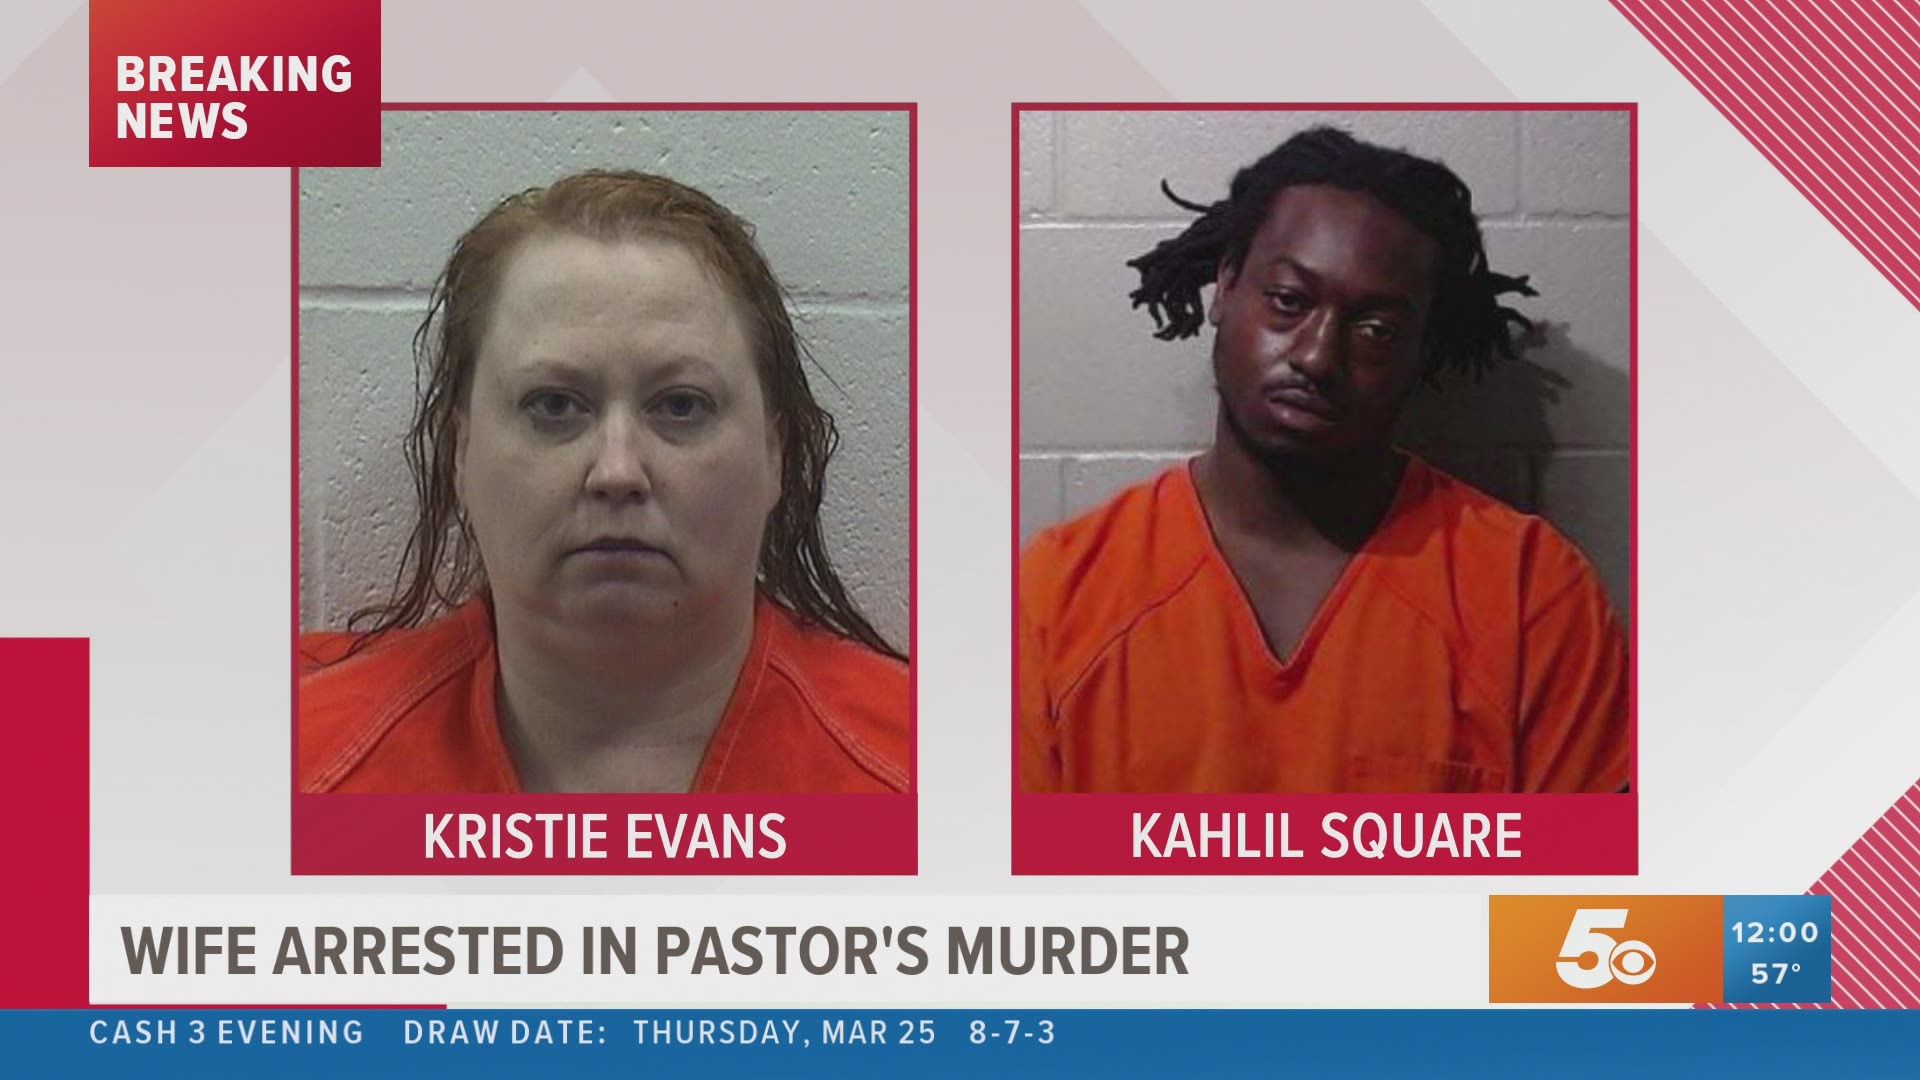 Two people have been arrested in connection to the murder of former pastor Dave Evan